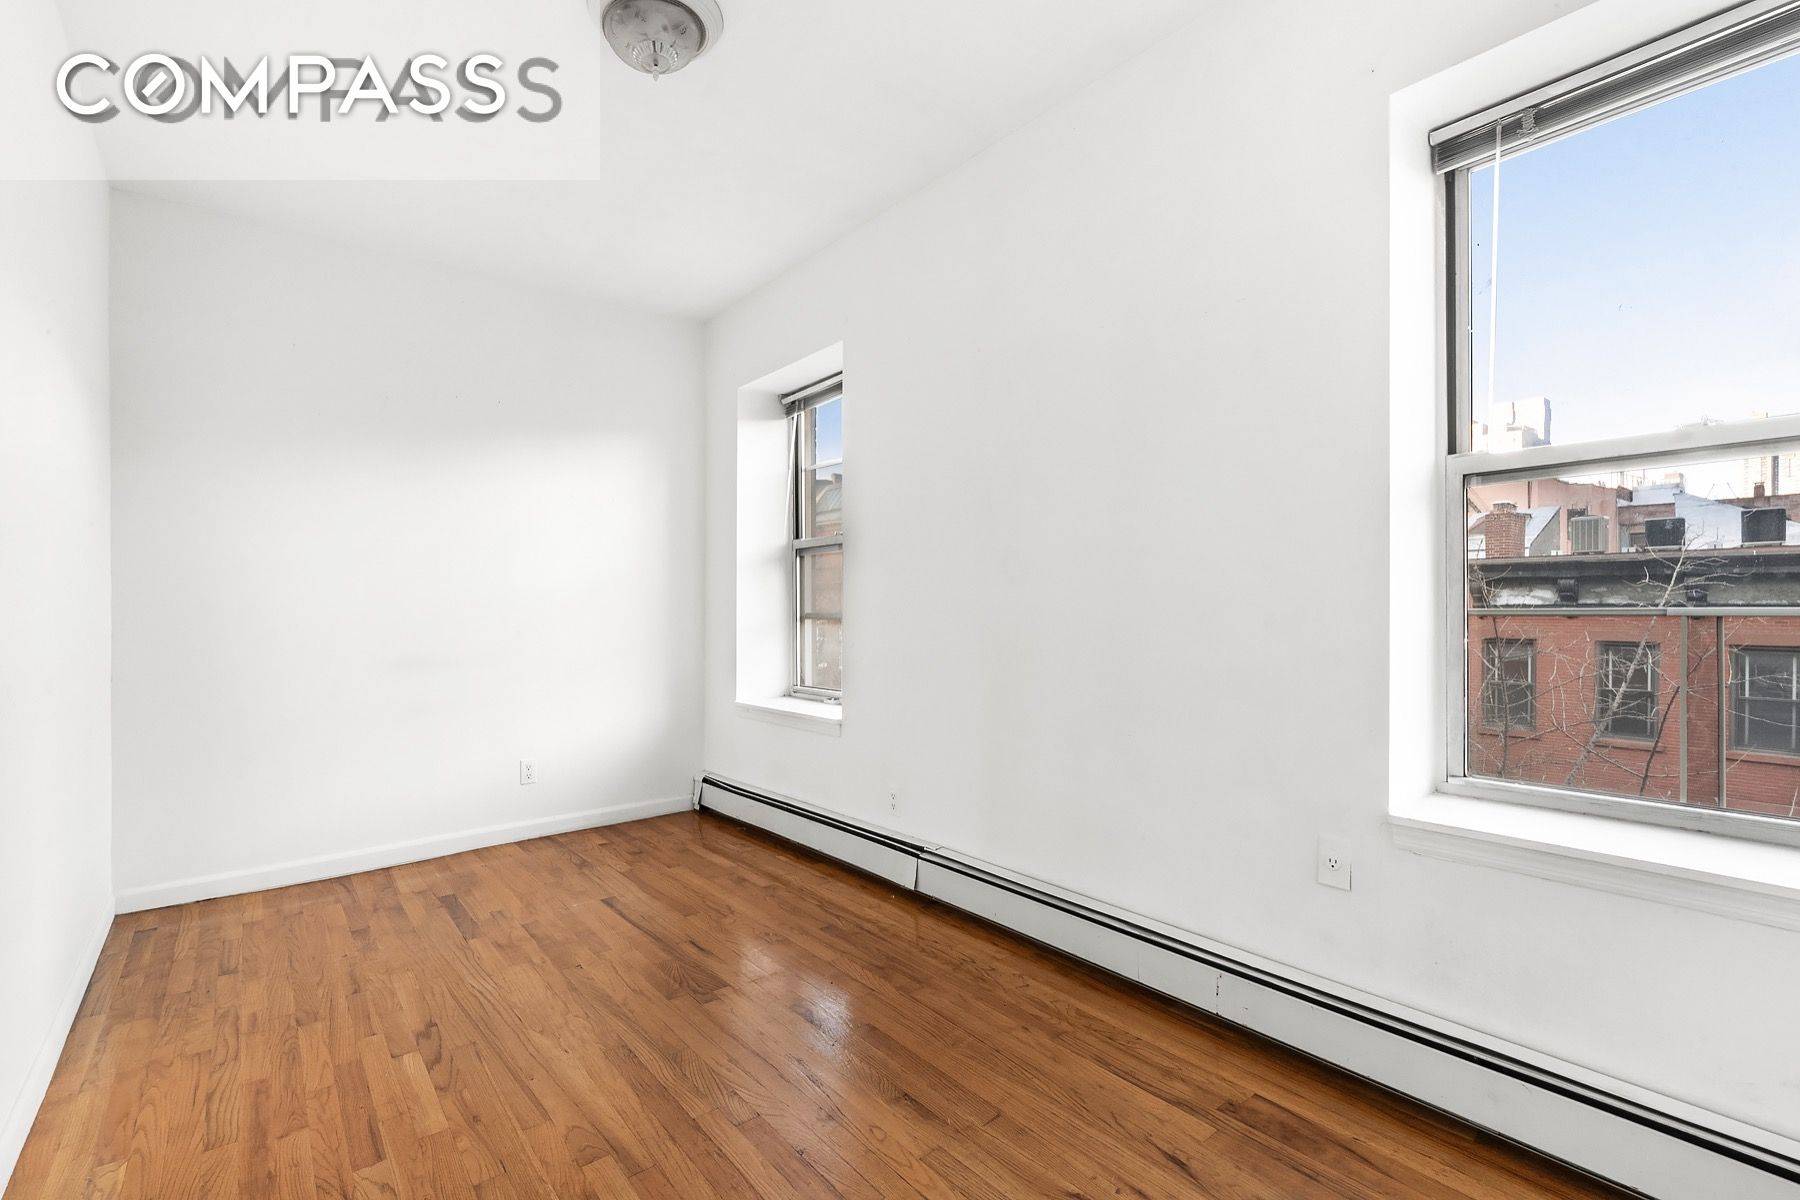 Spacious 4BR, 1 Bath in the heart of Midtown.